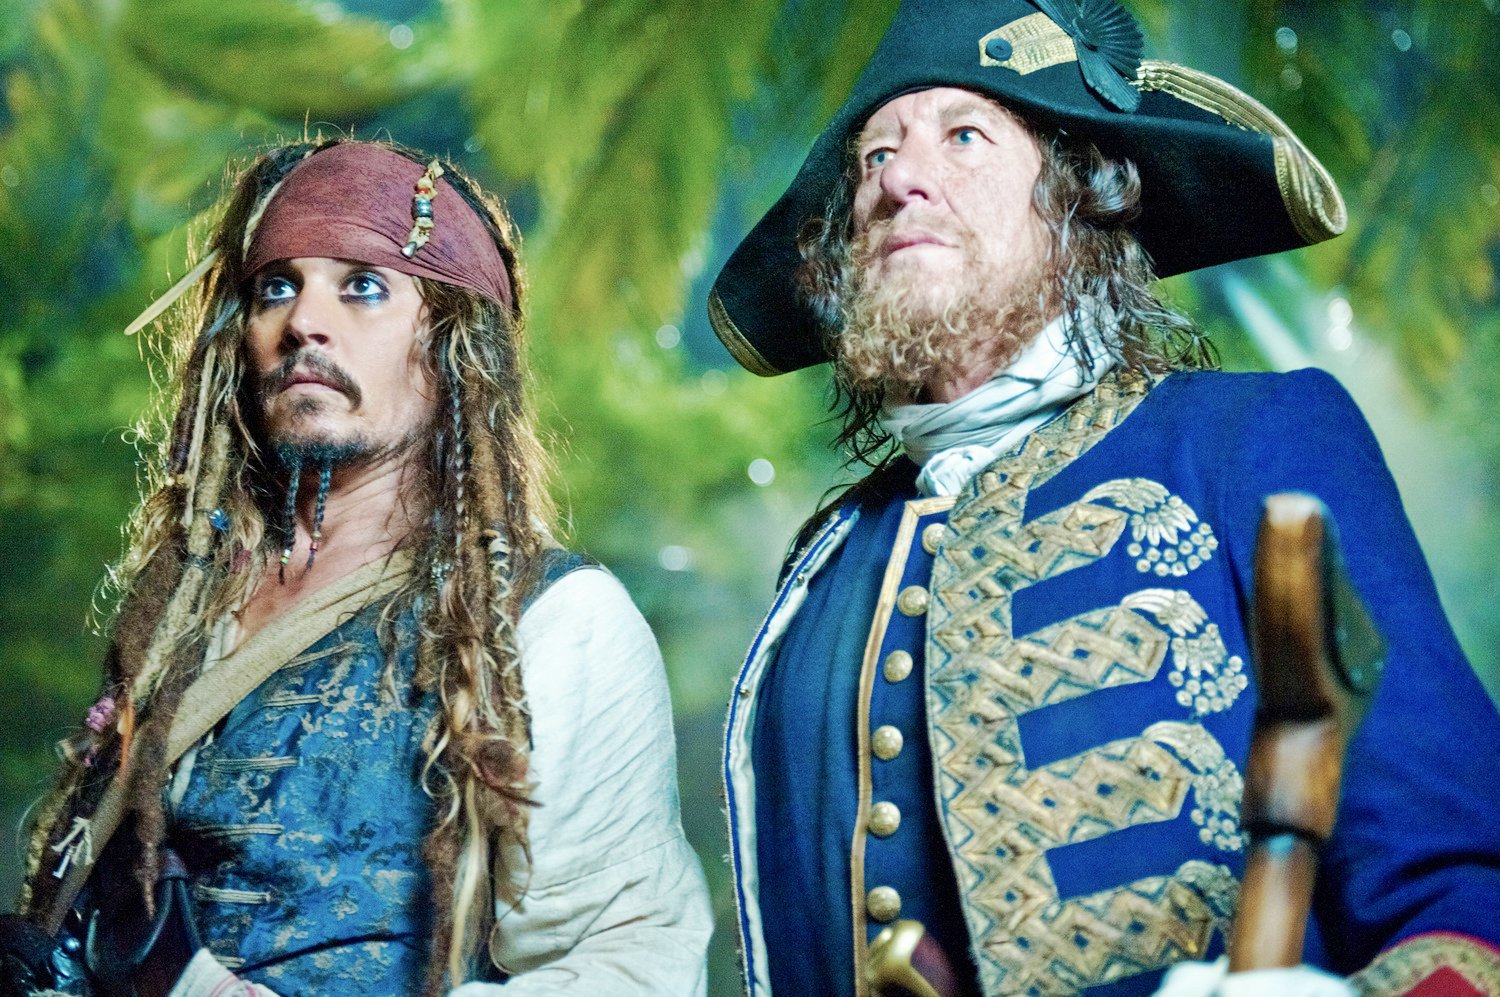 Johnny Depp stars as Jack Sparrow and Geoffrey Rush stars as Barbossa in Walt Disney Pictures' Pirates of the Caribbean: On Stranger Tides (2011)